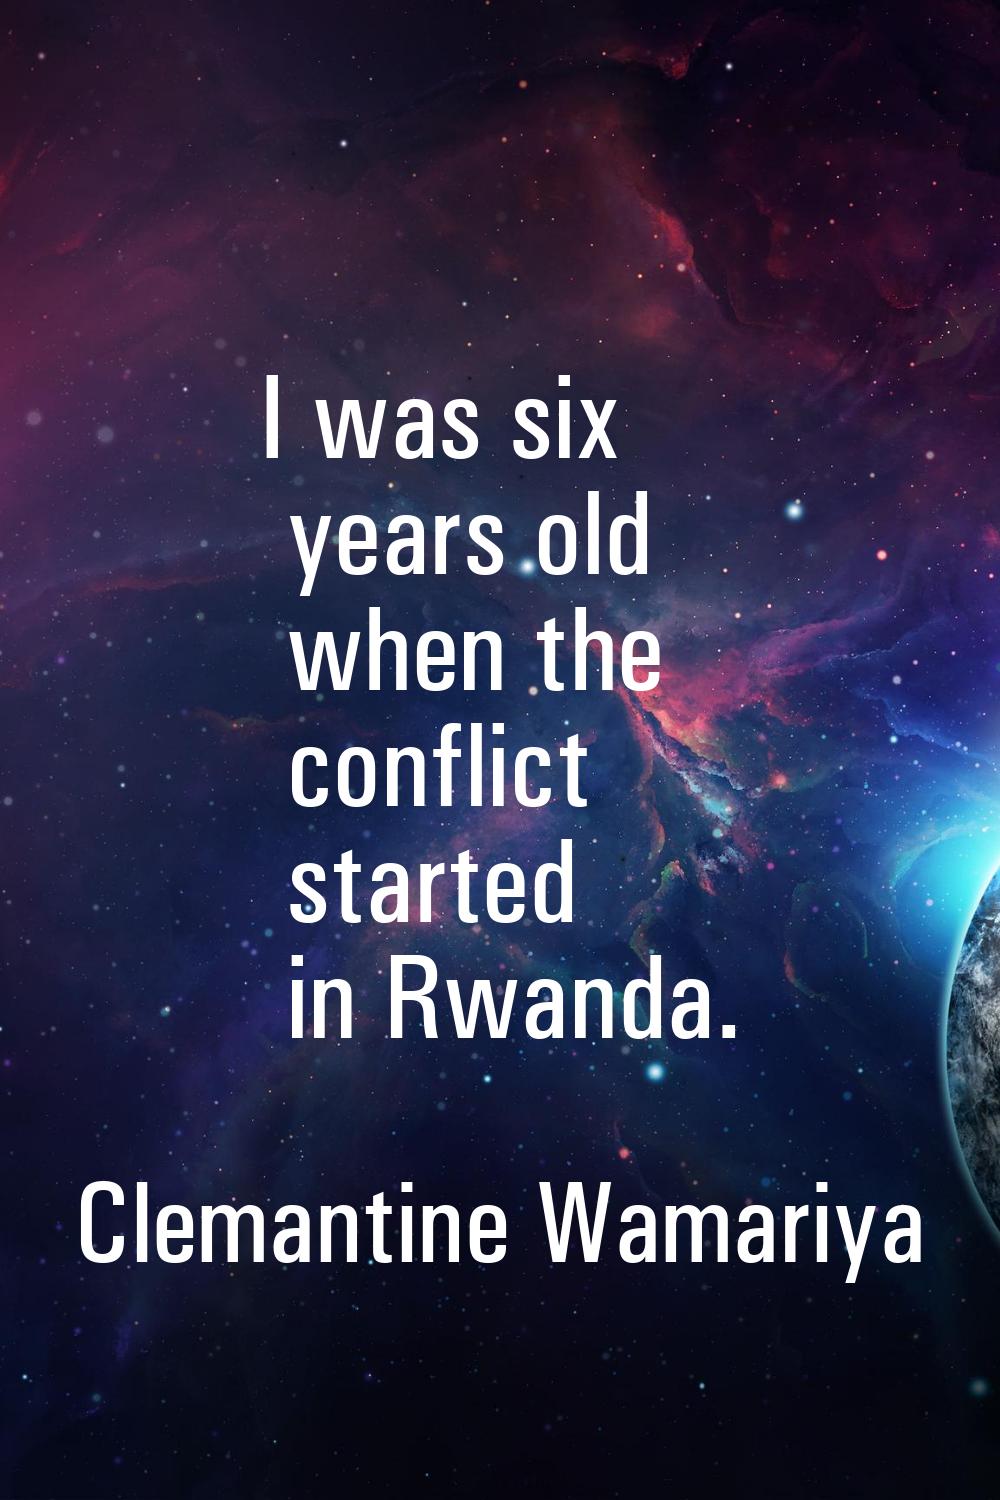 I was six years old when the conflict started in Rwanda.